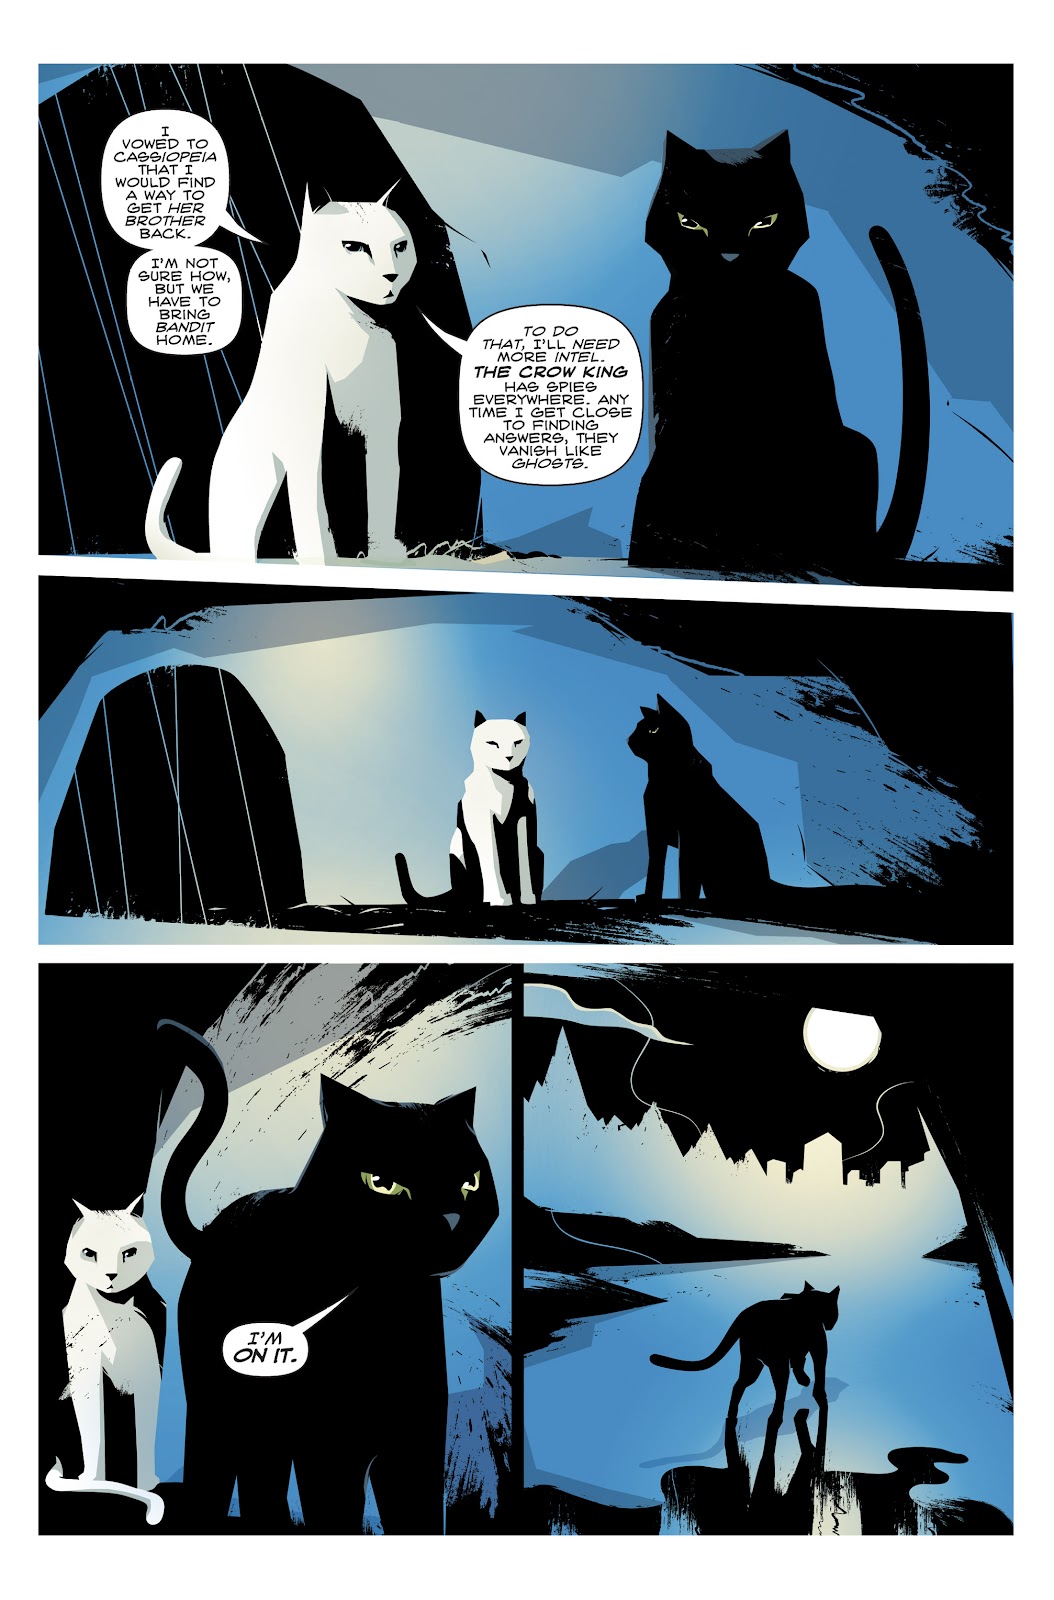 Hero Cats: Midnight Over Stellar City Vol. 2 issue 1 - Page 8